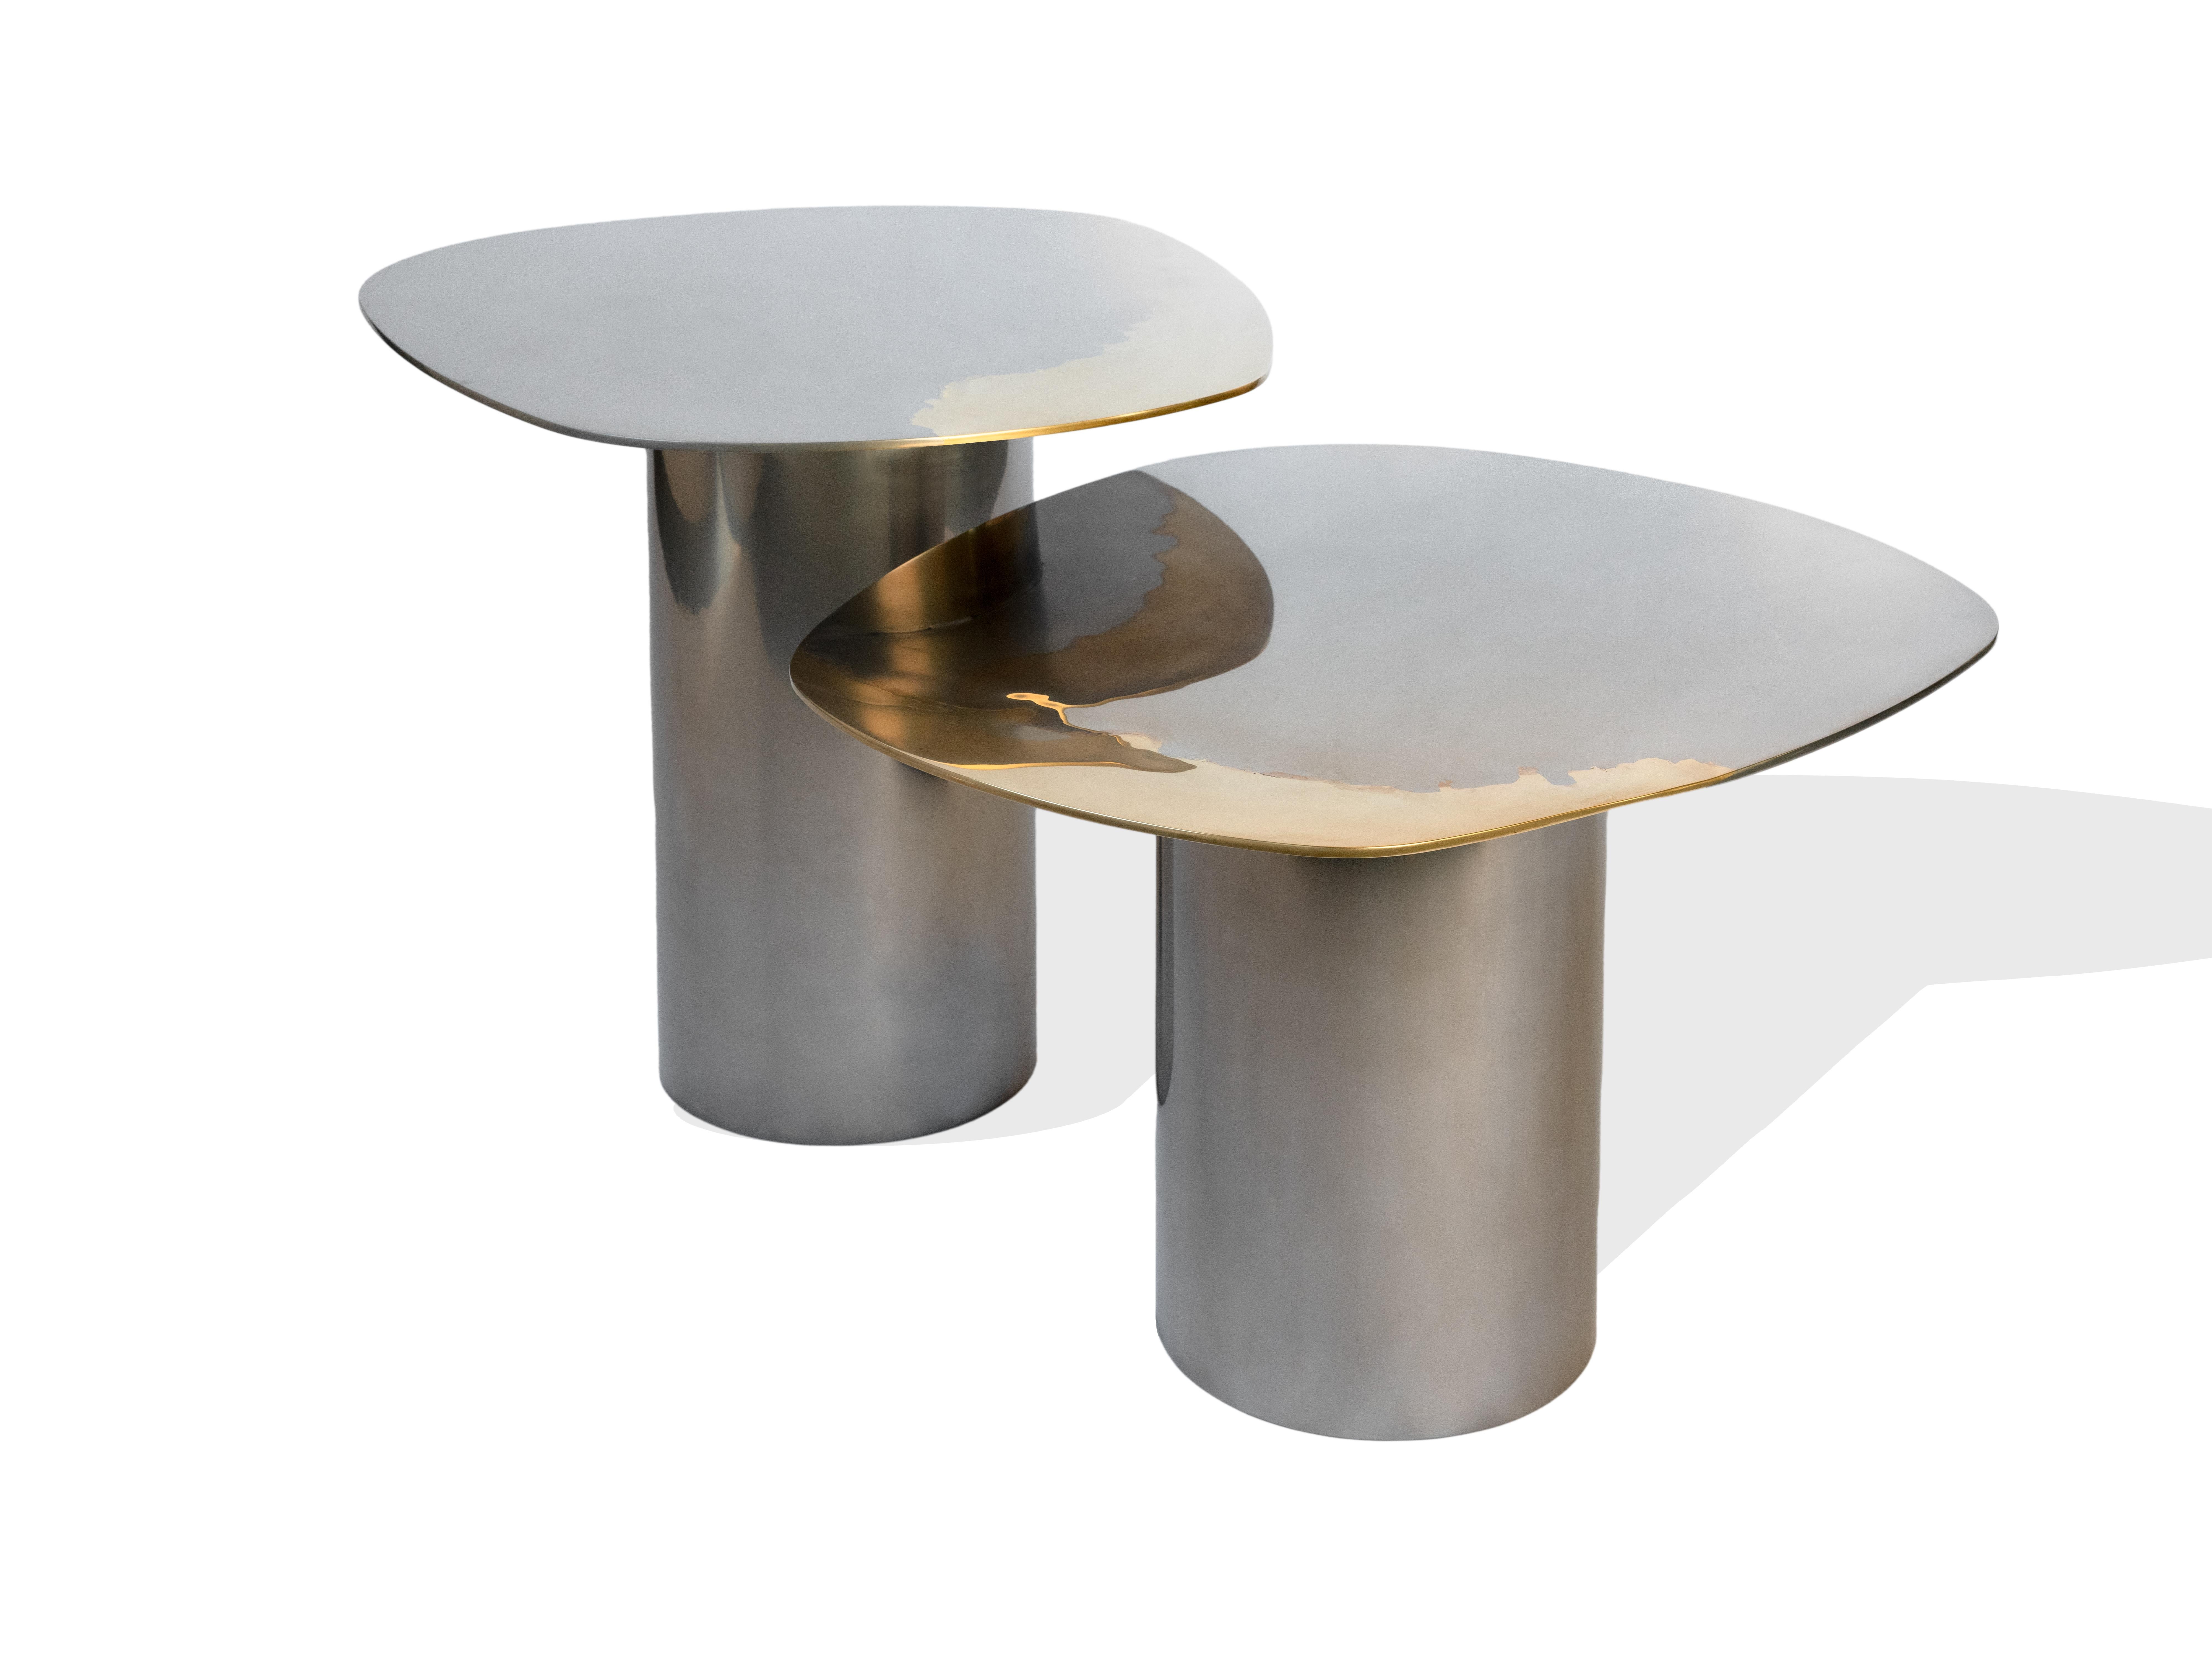 A set of nesting tables as part of the Transition collection, featuring unique, artistic mirror polished tabletops, crafted from brass and stainless steel on tubular bases. 

Studio Warm has developed a distinctive, high-end, artistic finish